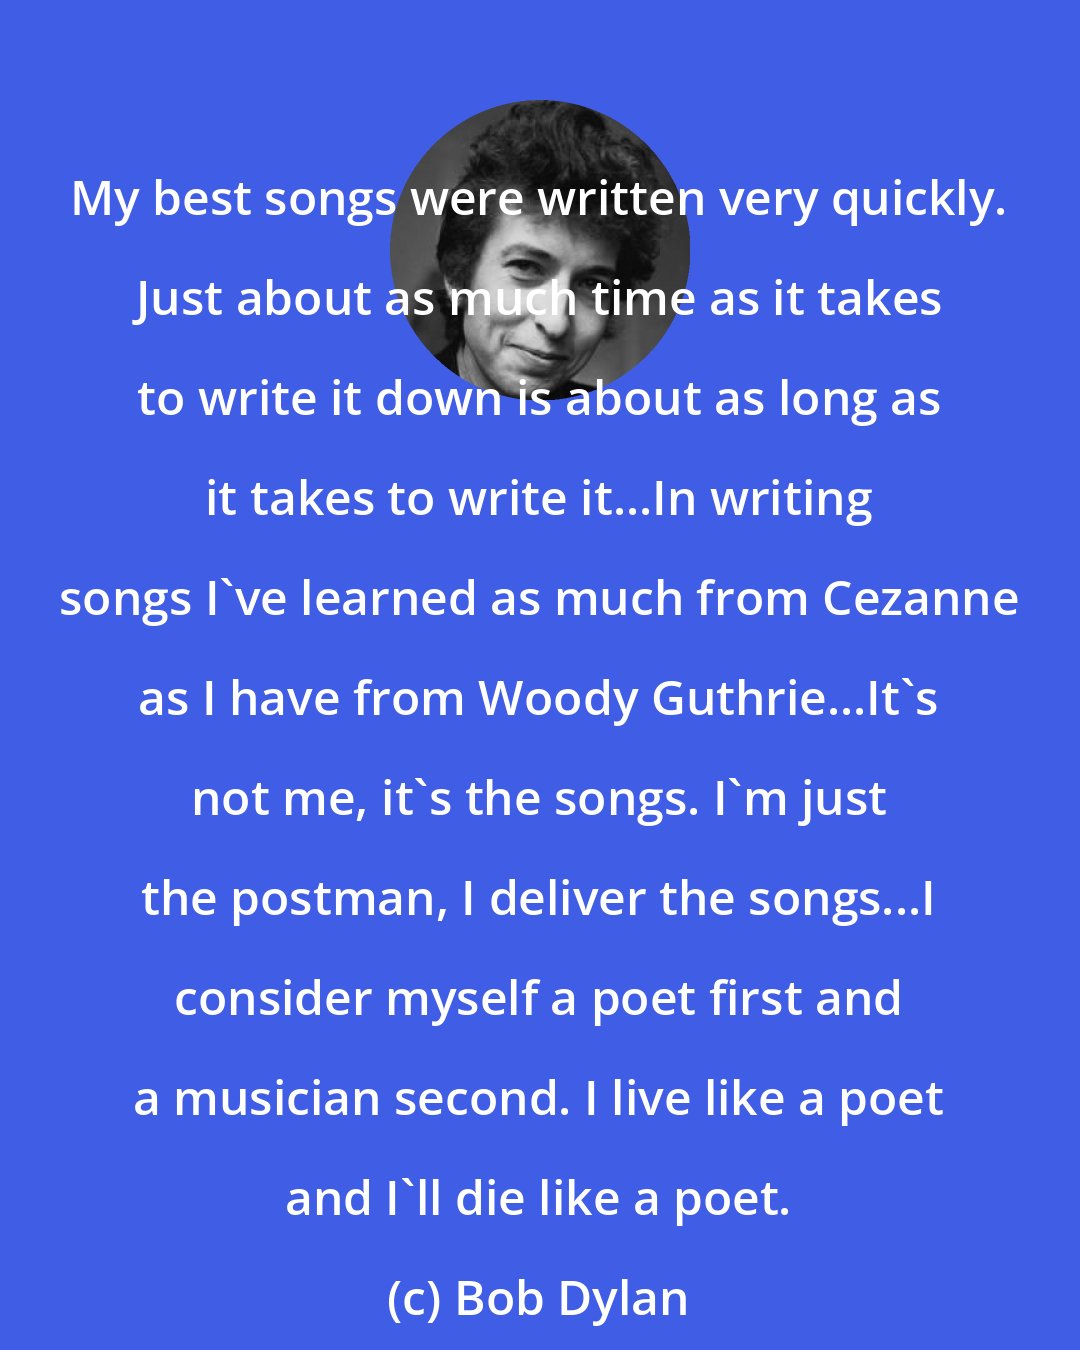 Bob Dylan: My best songs were written very quickly. Just about as much time as it takes to write it down is about as long as it takes to write it...In writing songs I've learned as much from Cezanne as I have from Woody Guthrie...It's not me, it's the songs. I'm just the postman, I deliver the songs...I consider myself a poet first and a musician second. I live like a poet and I'll die like a poet.